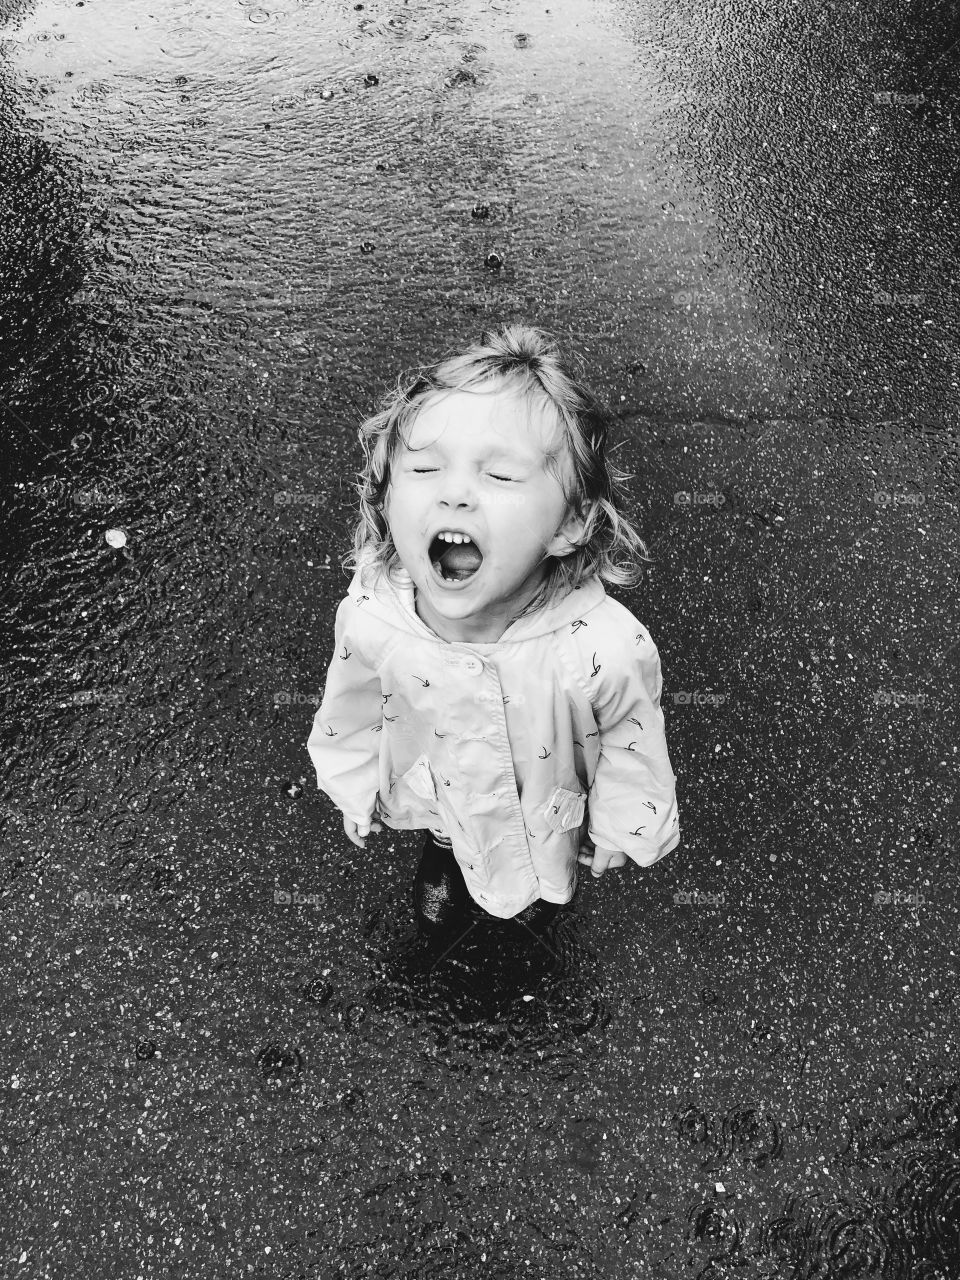 Little girls standing in the rain trying to catch rain drops in her mouth.